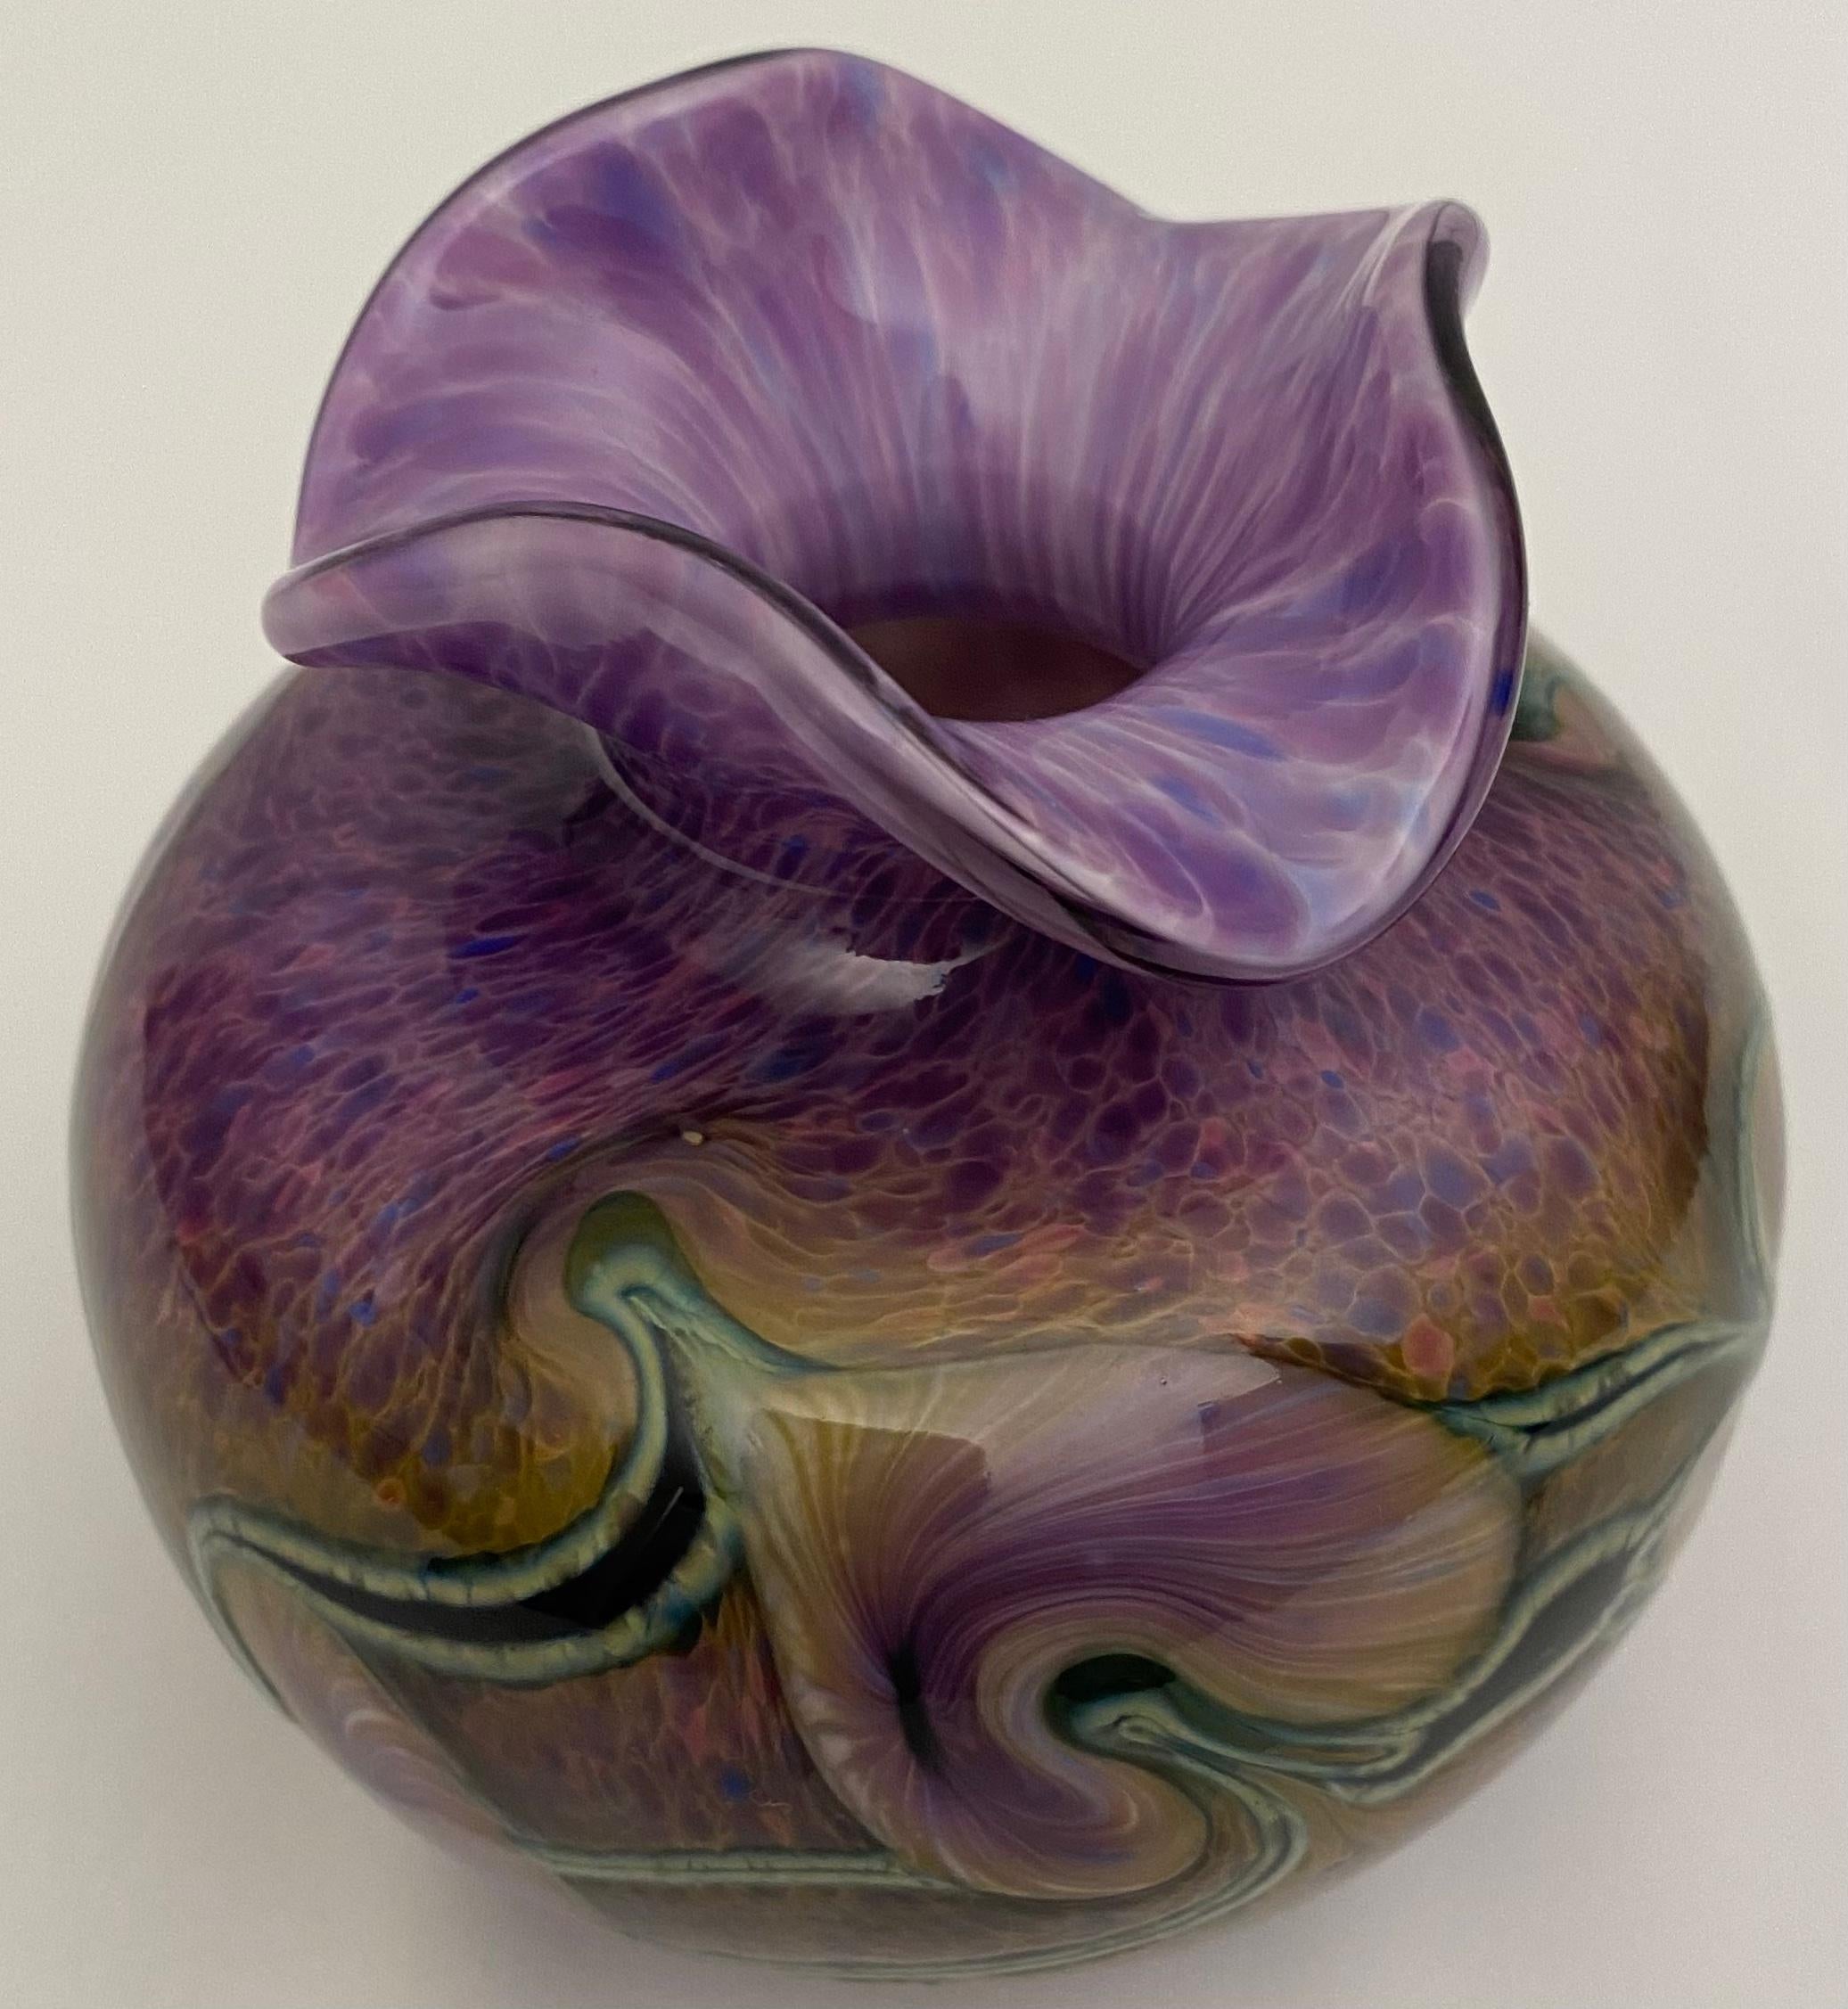 Hand-Crafted Fratelli Toso Murano Art Glass Decorative Object Swirl Design, Signed For Sale